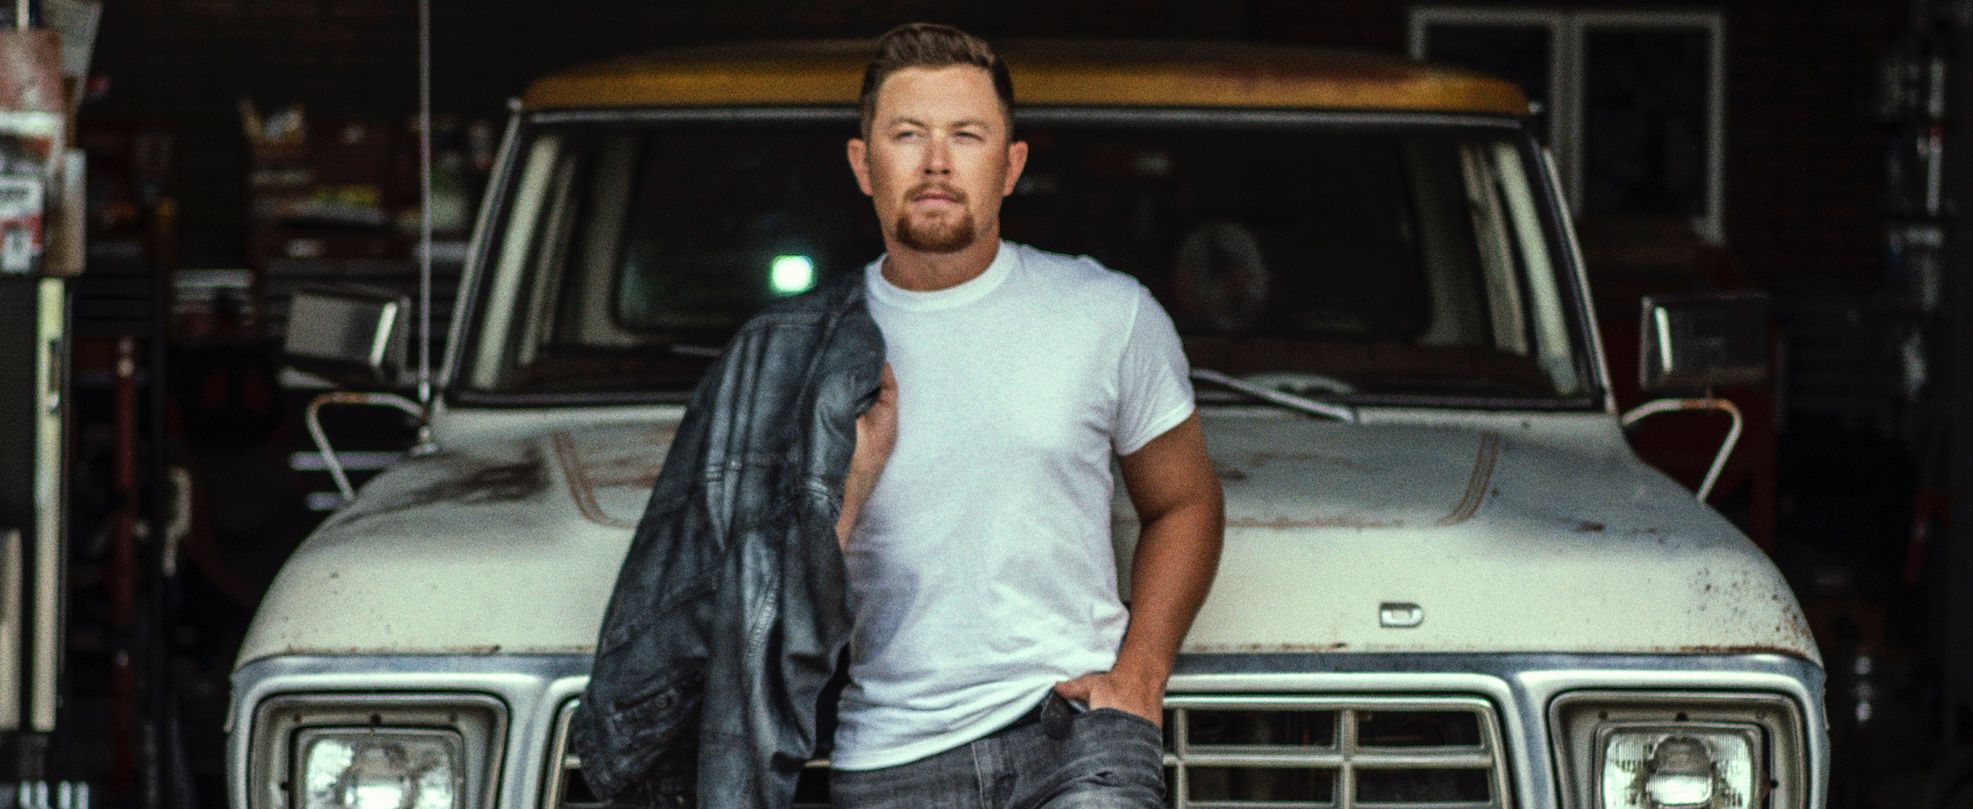 Off The Record: Working on His New Album ‘Same Truck,’ Scotty McCreery Felt Like a Kid Again